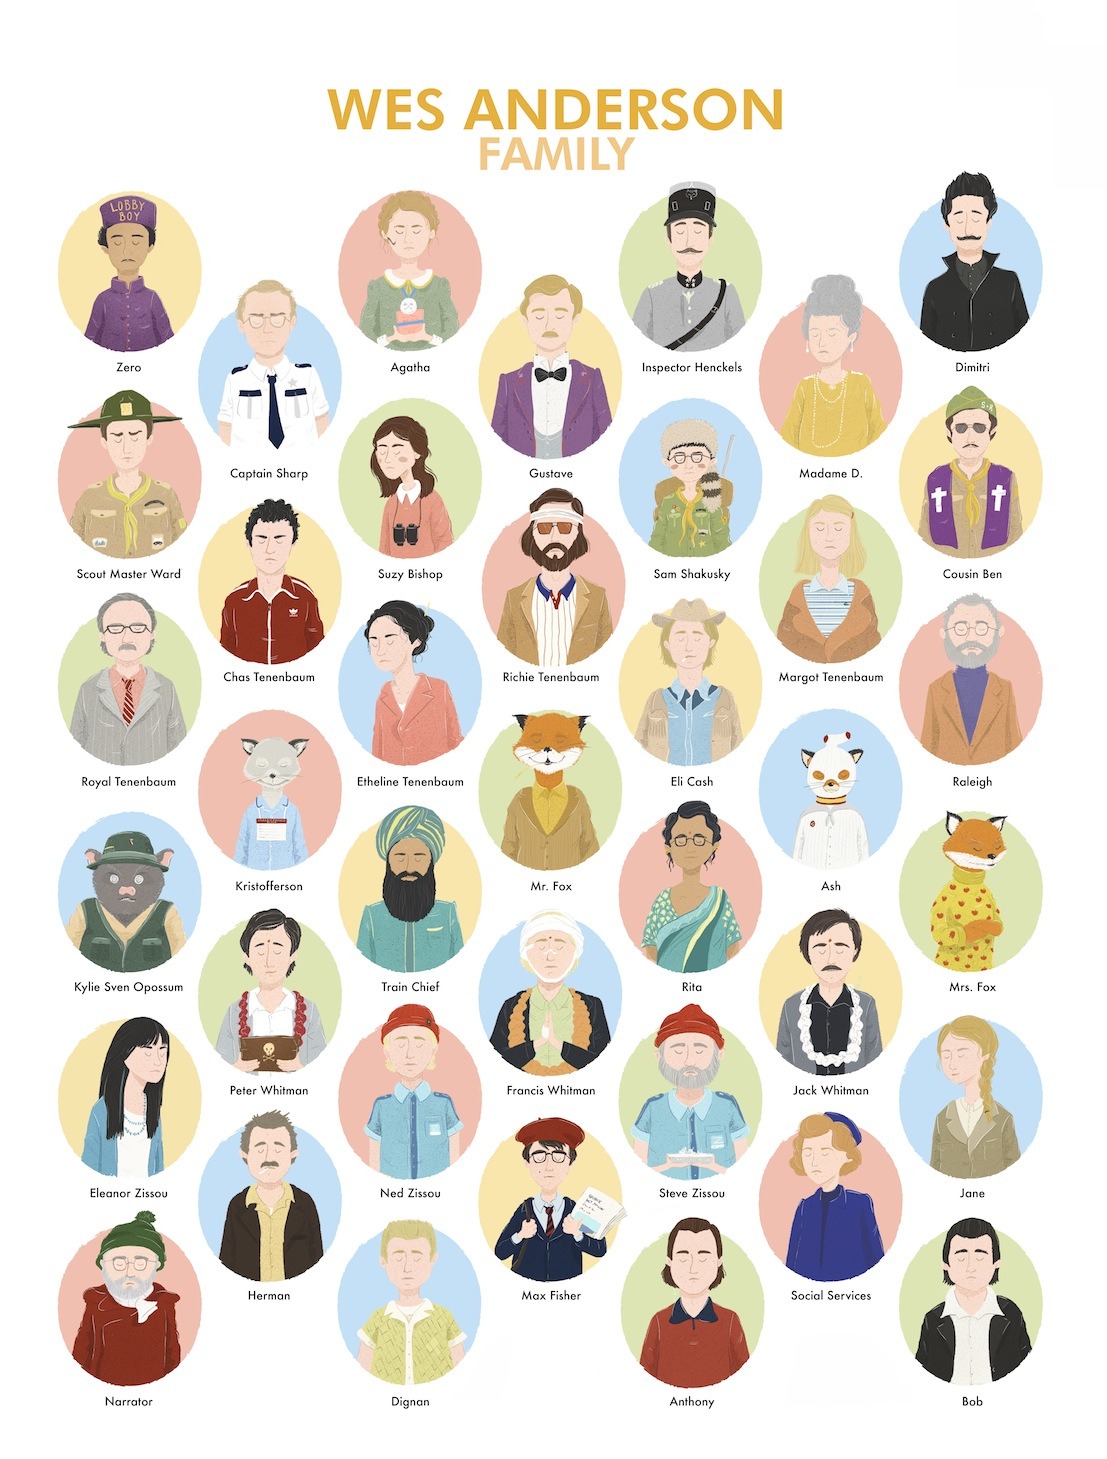 “Wes Anderson family” Bad Dads V - Spoke Art gallery - San Francisco This is my contribution for the fabulous show “Bad dads V” an art show tribute to Wes Anderson’s films by Spoke Art gallery in San Francisco. I decided to represent almost every...